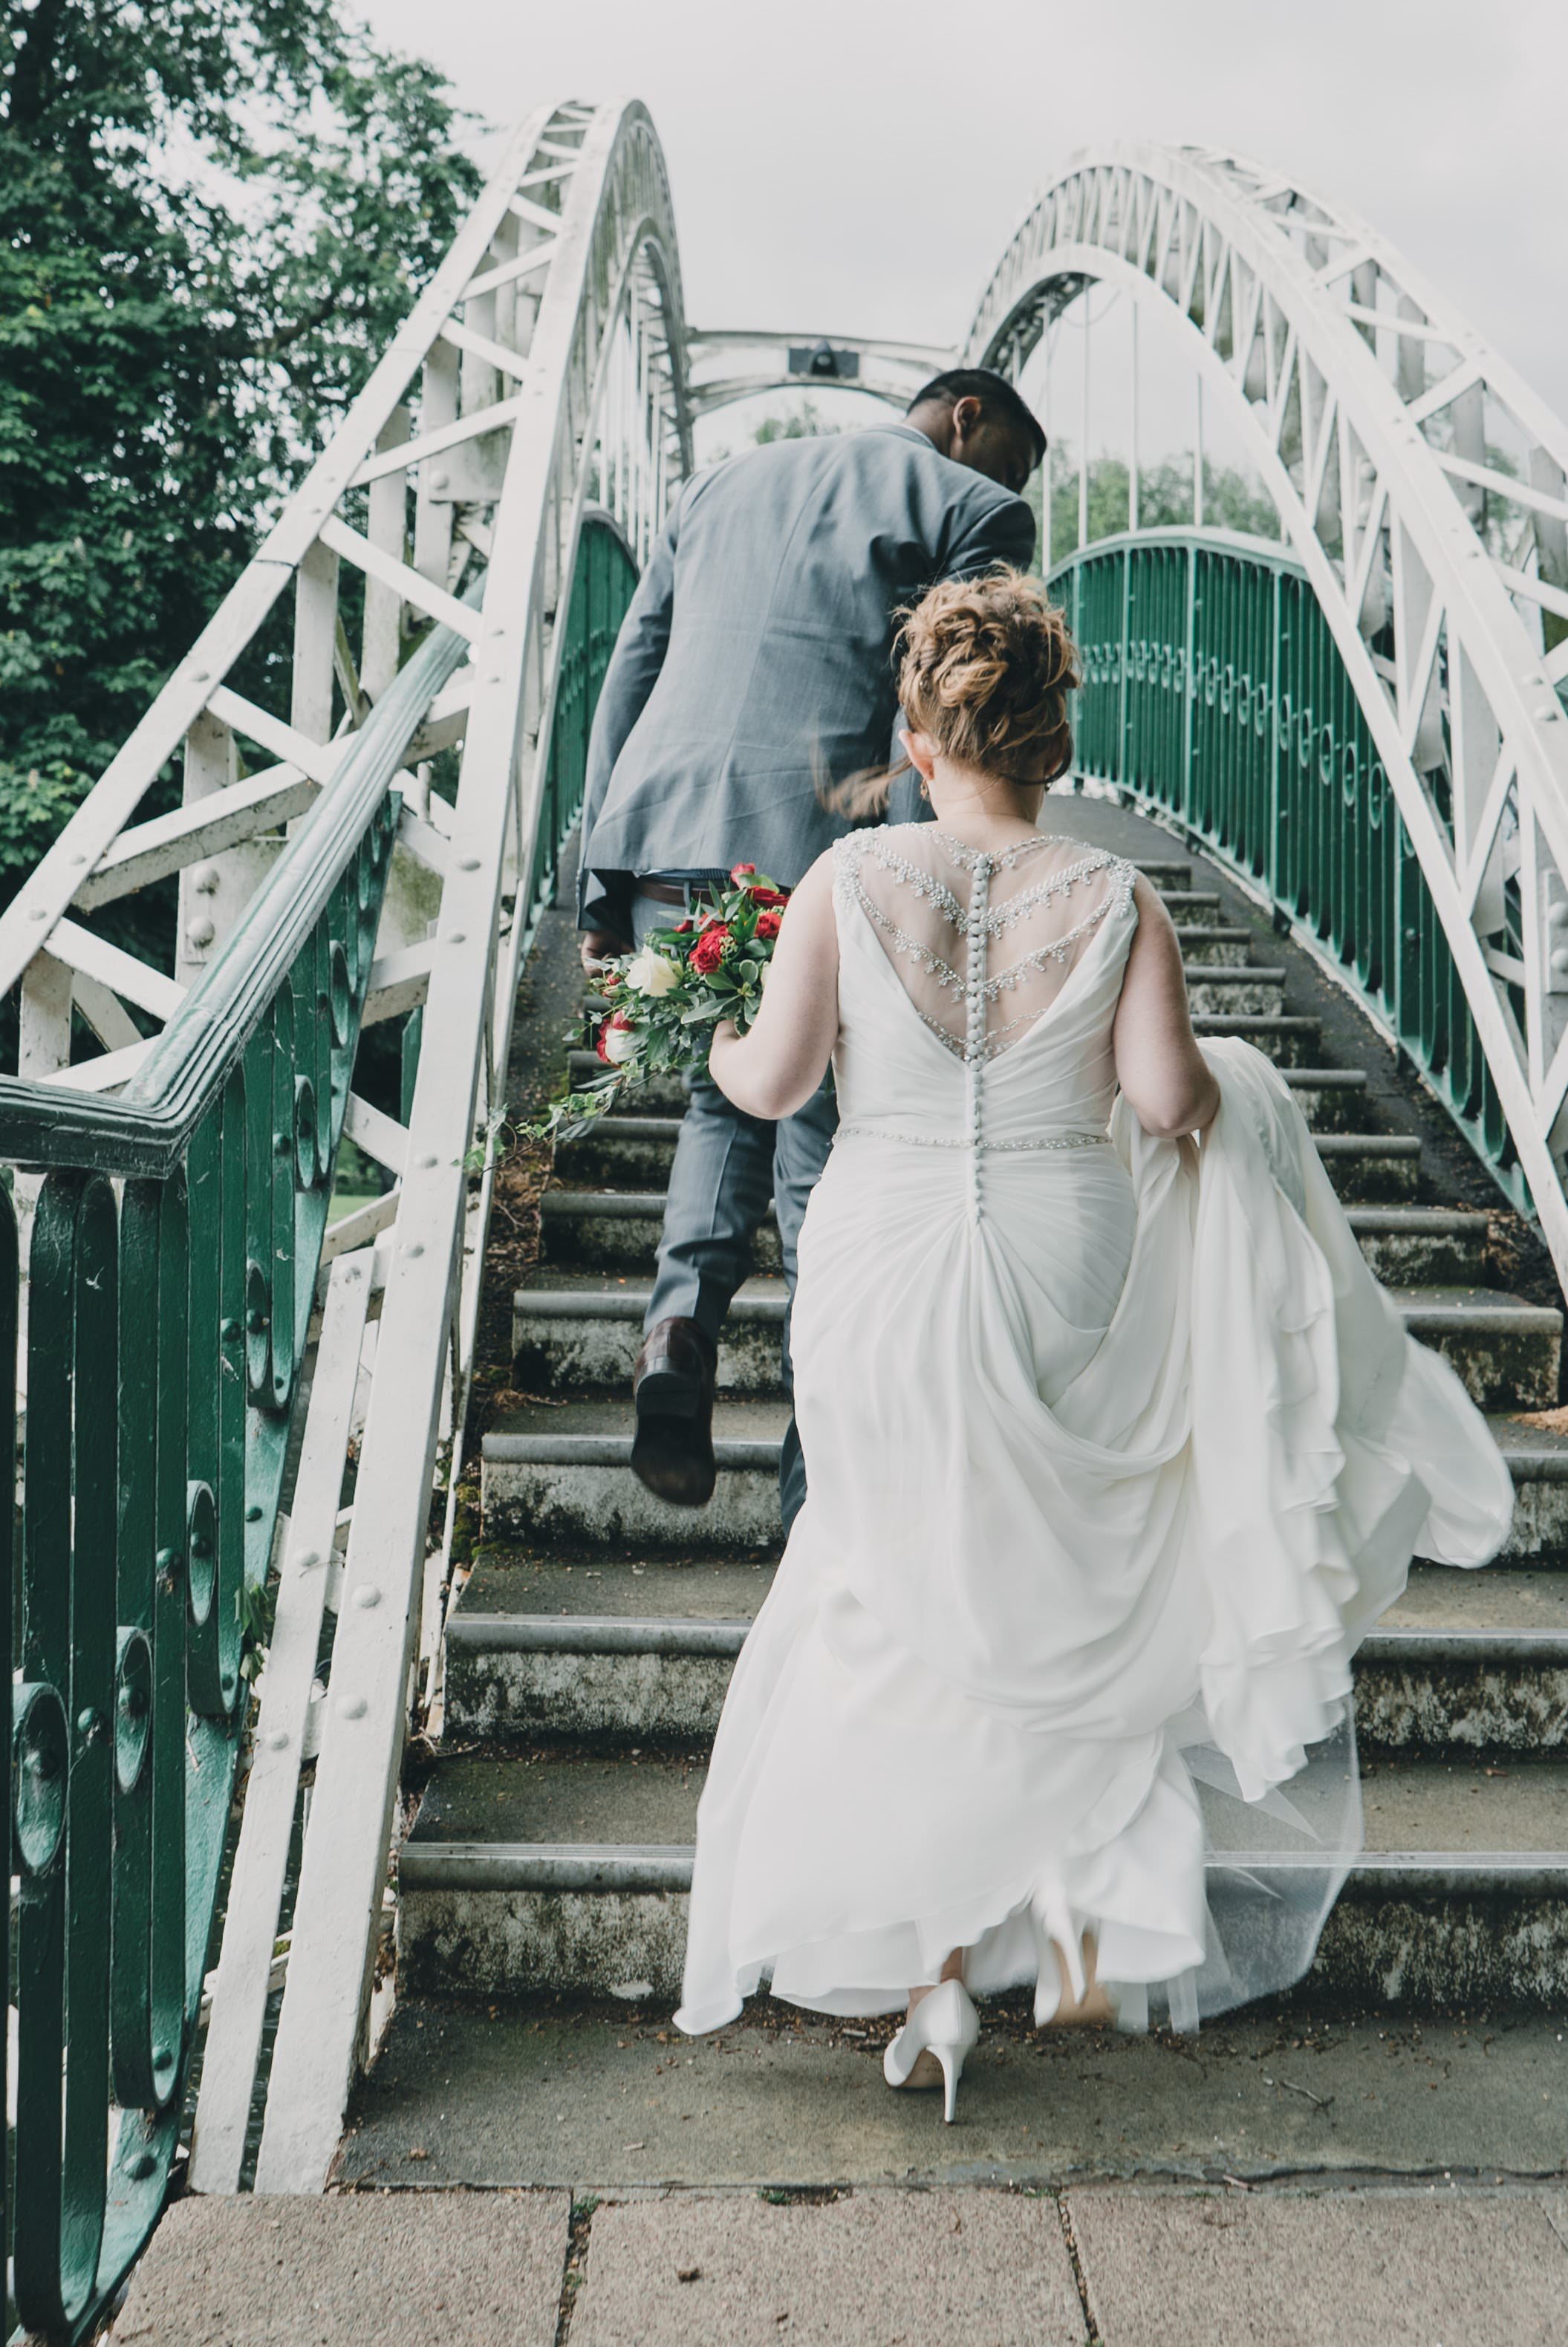 Bride Going Up Embankment Stairs